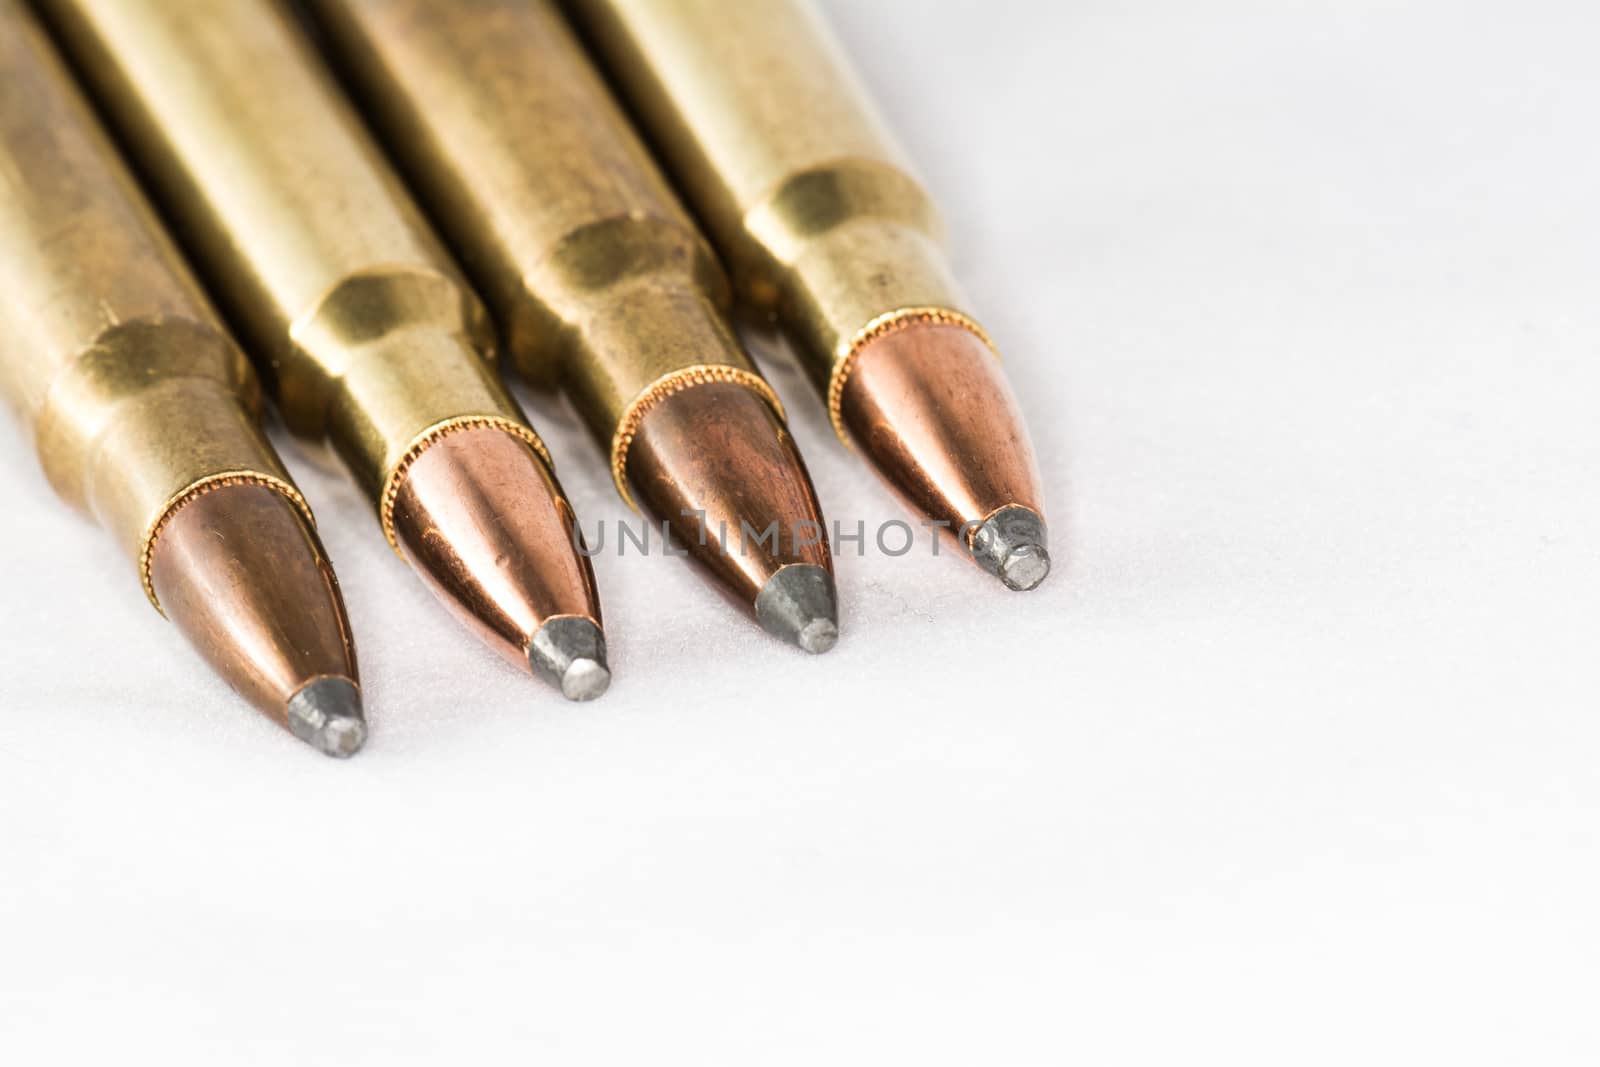 Tips of a few rifle bullets lined up in a row on white background